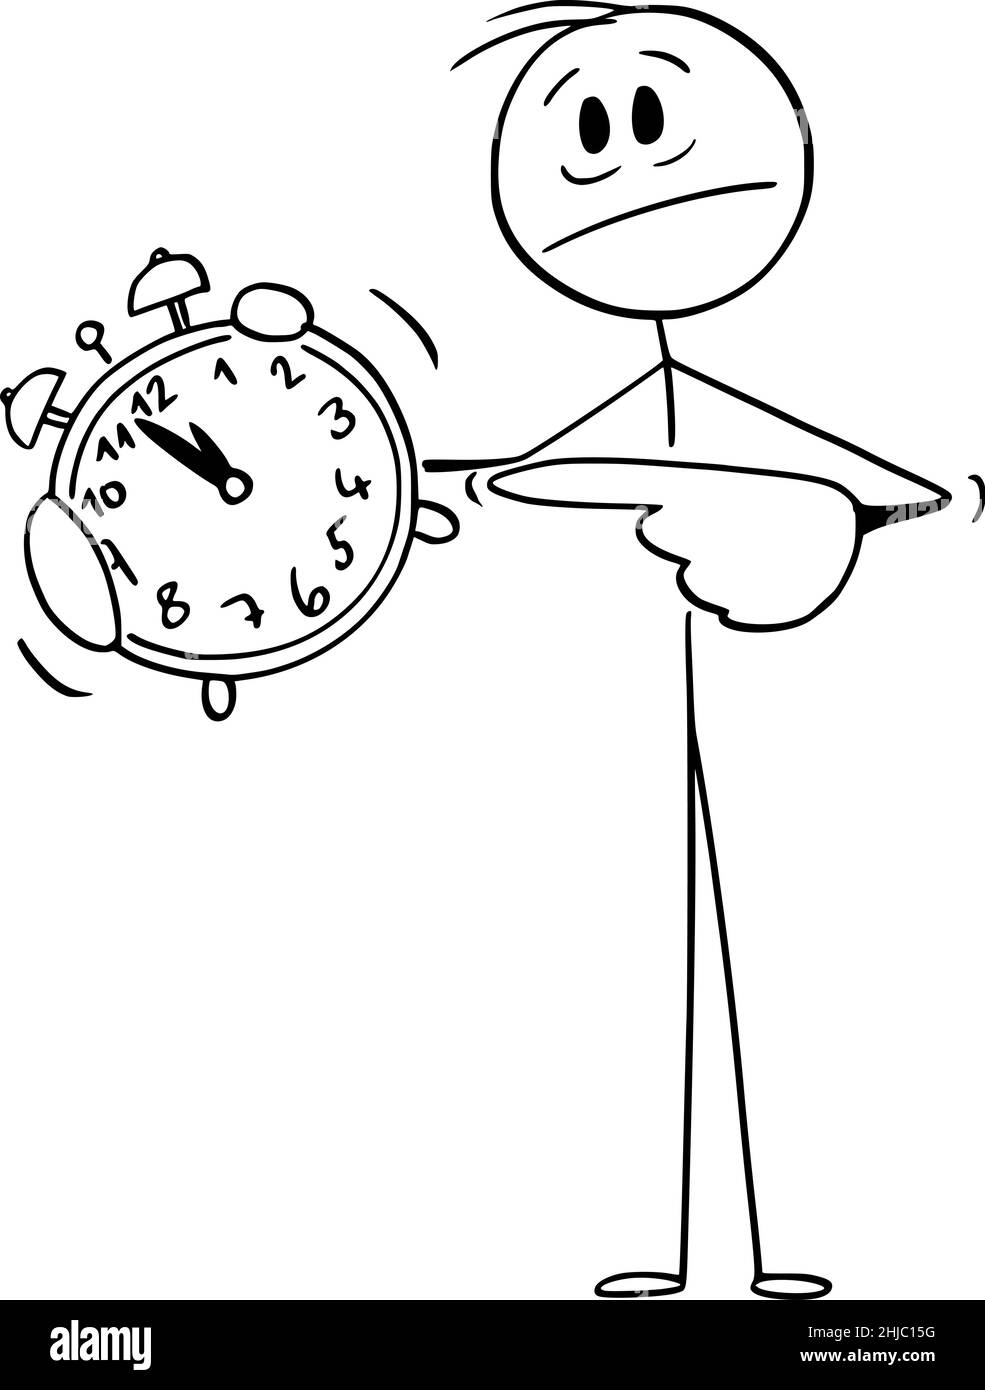 Frustrated Person Holding and Pointing at Alarm Clock, Vector Cartoon Stick Figure Illustration Stock Vector